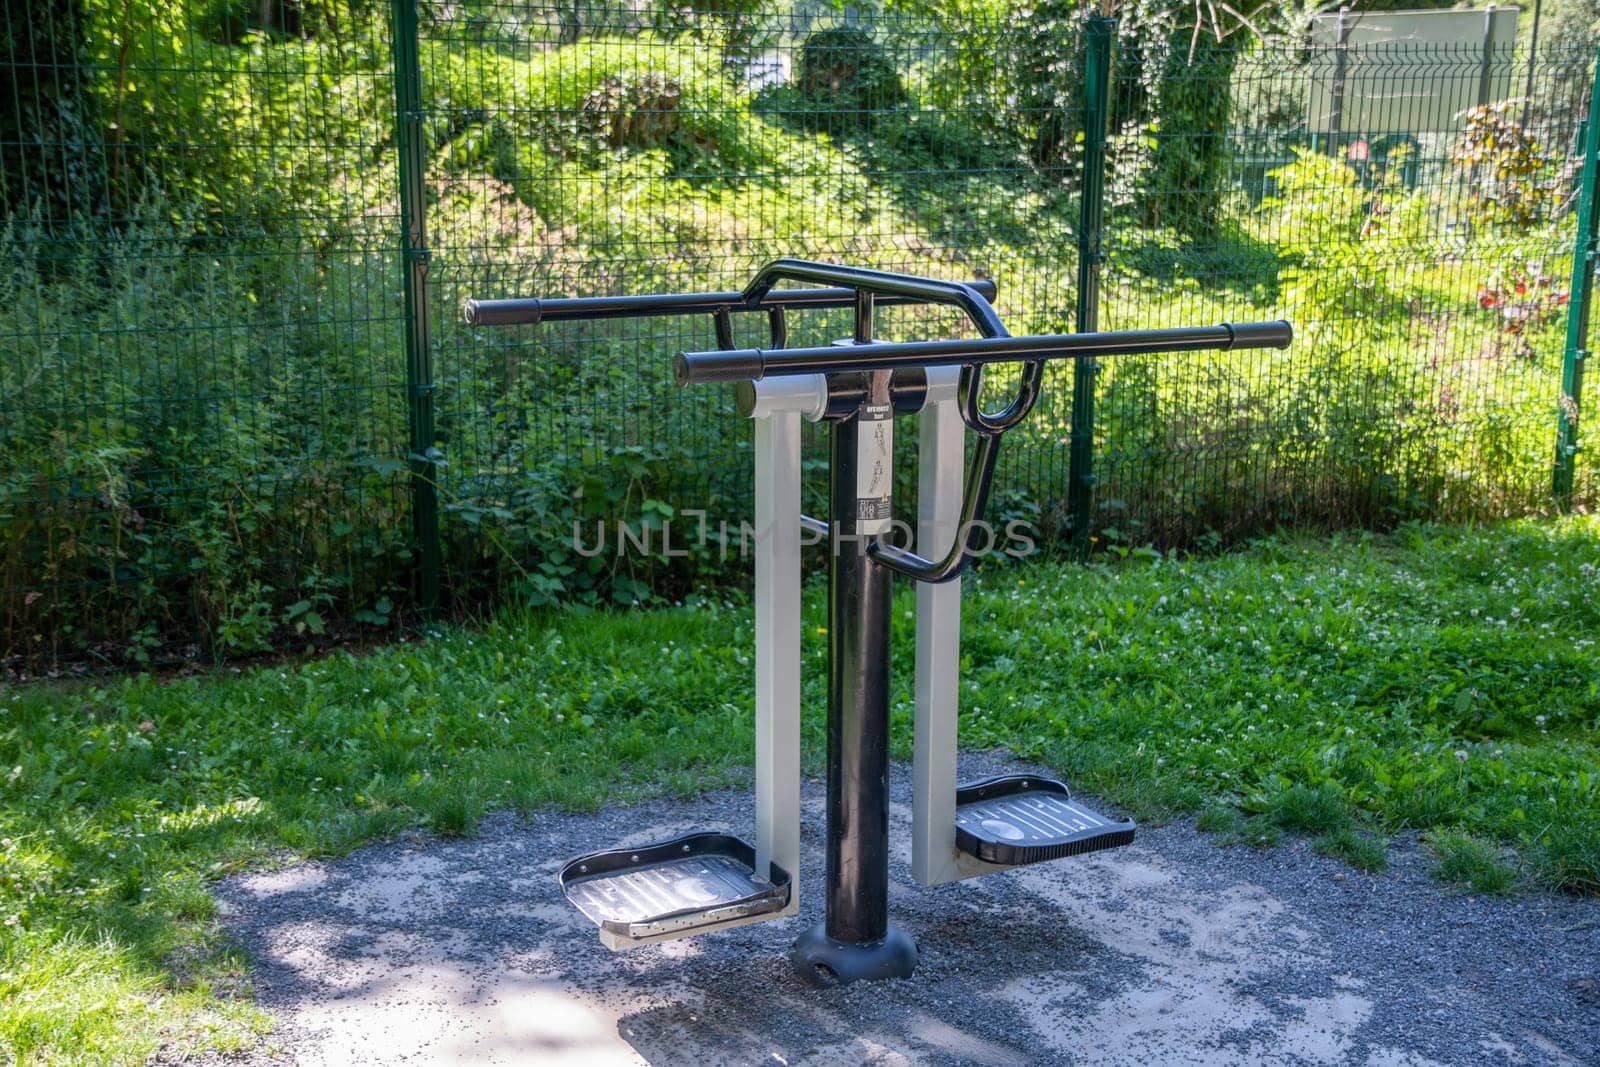 Exercise machines and fitness equipment in the street outdoor gym by KaterinaDalemans